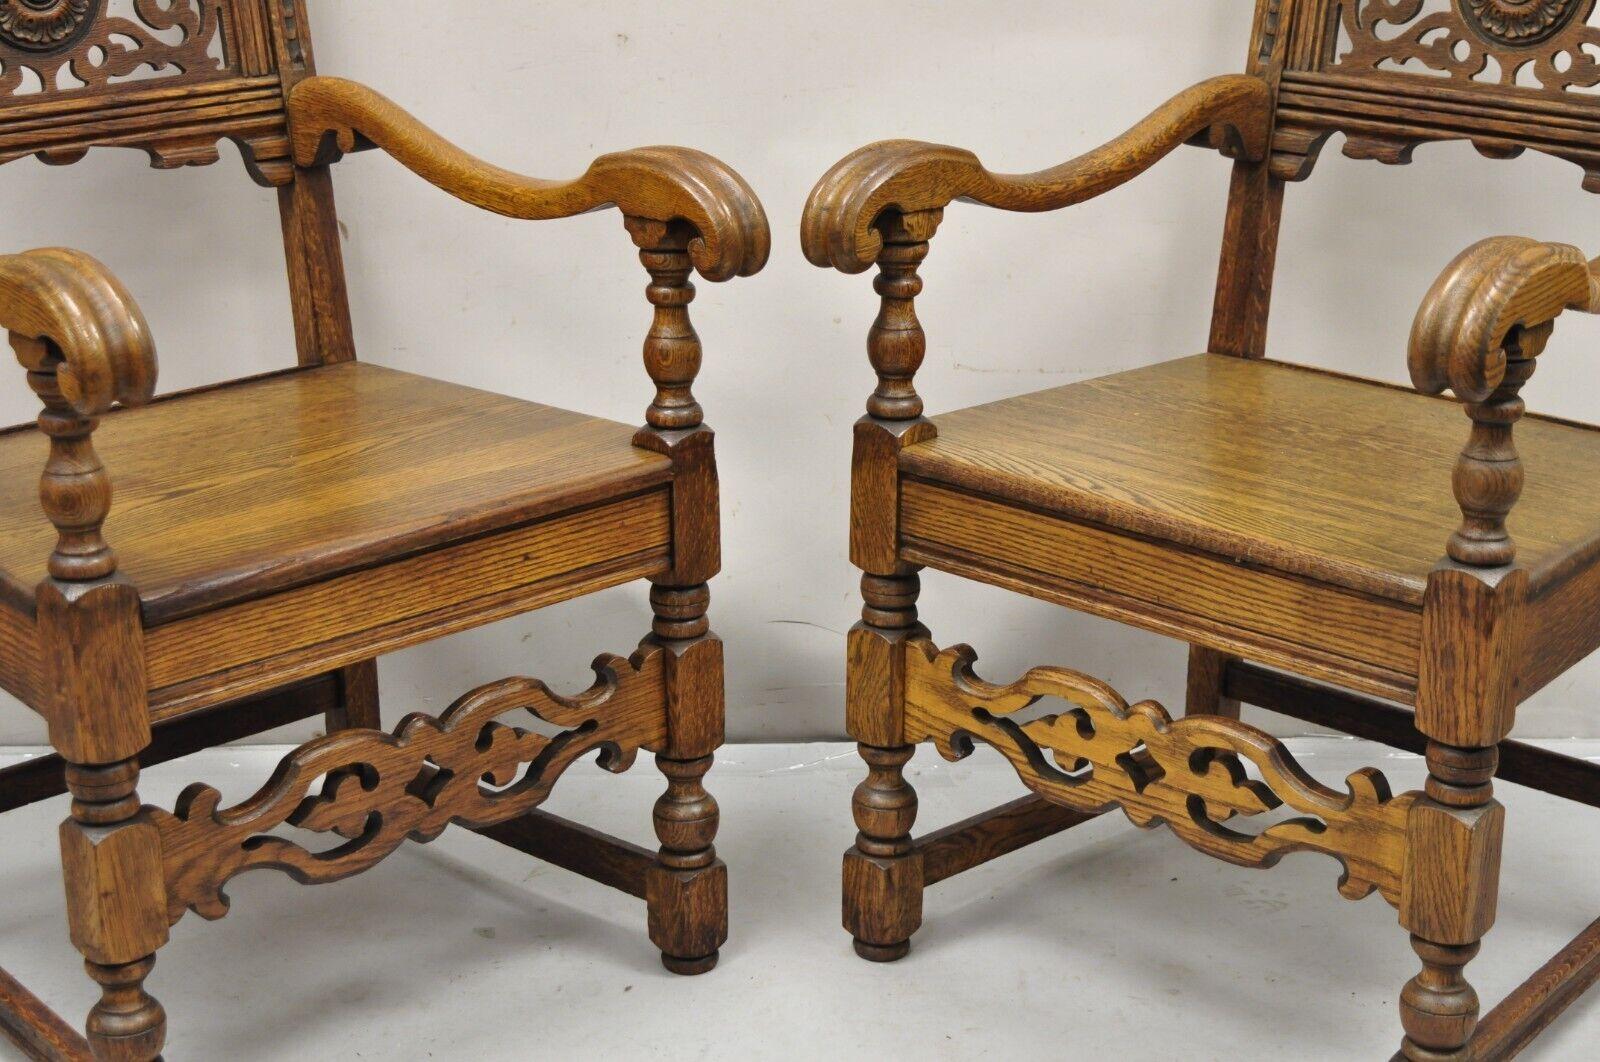 Antique Vanleigh Carved Oak Italian Renaissance Style Throne Arm Chairs - a Pair For Sale 3